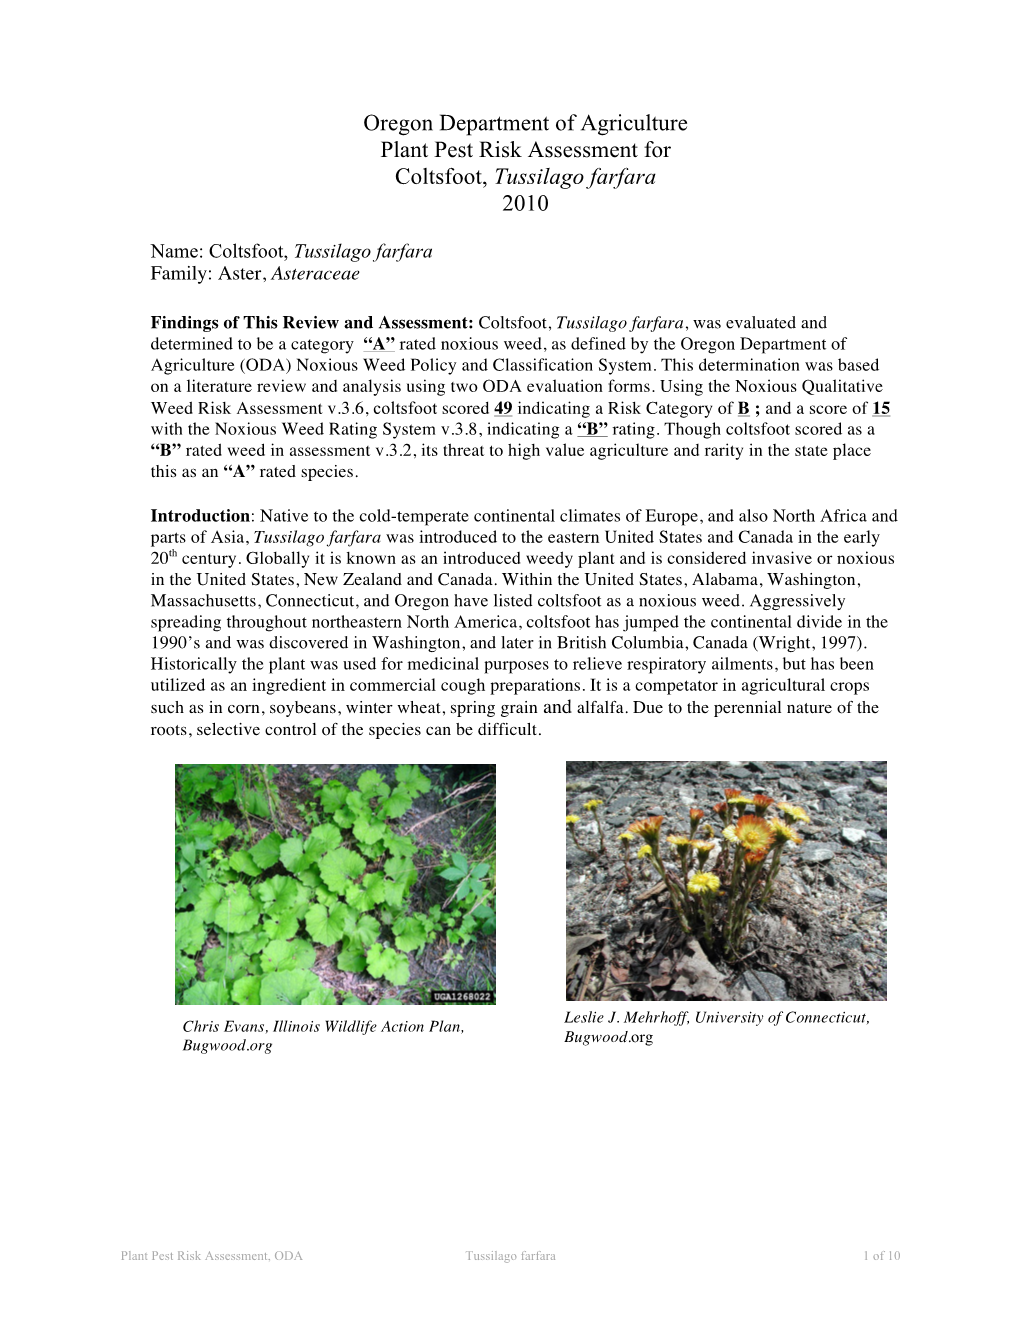 Plant Pest Risk Assessment for Coltsfoot, Tussilago Farfara 2010